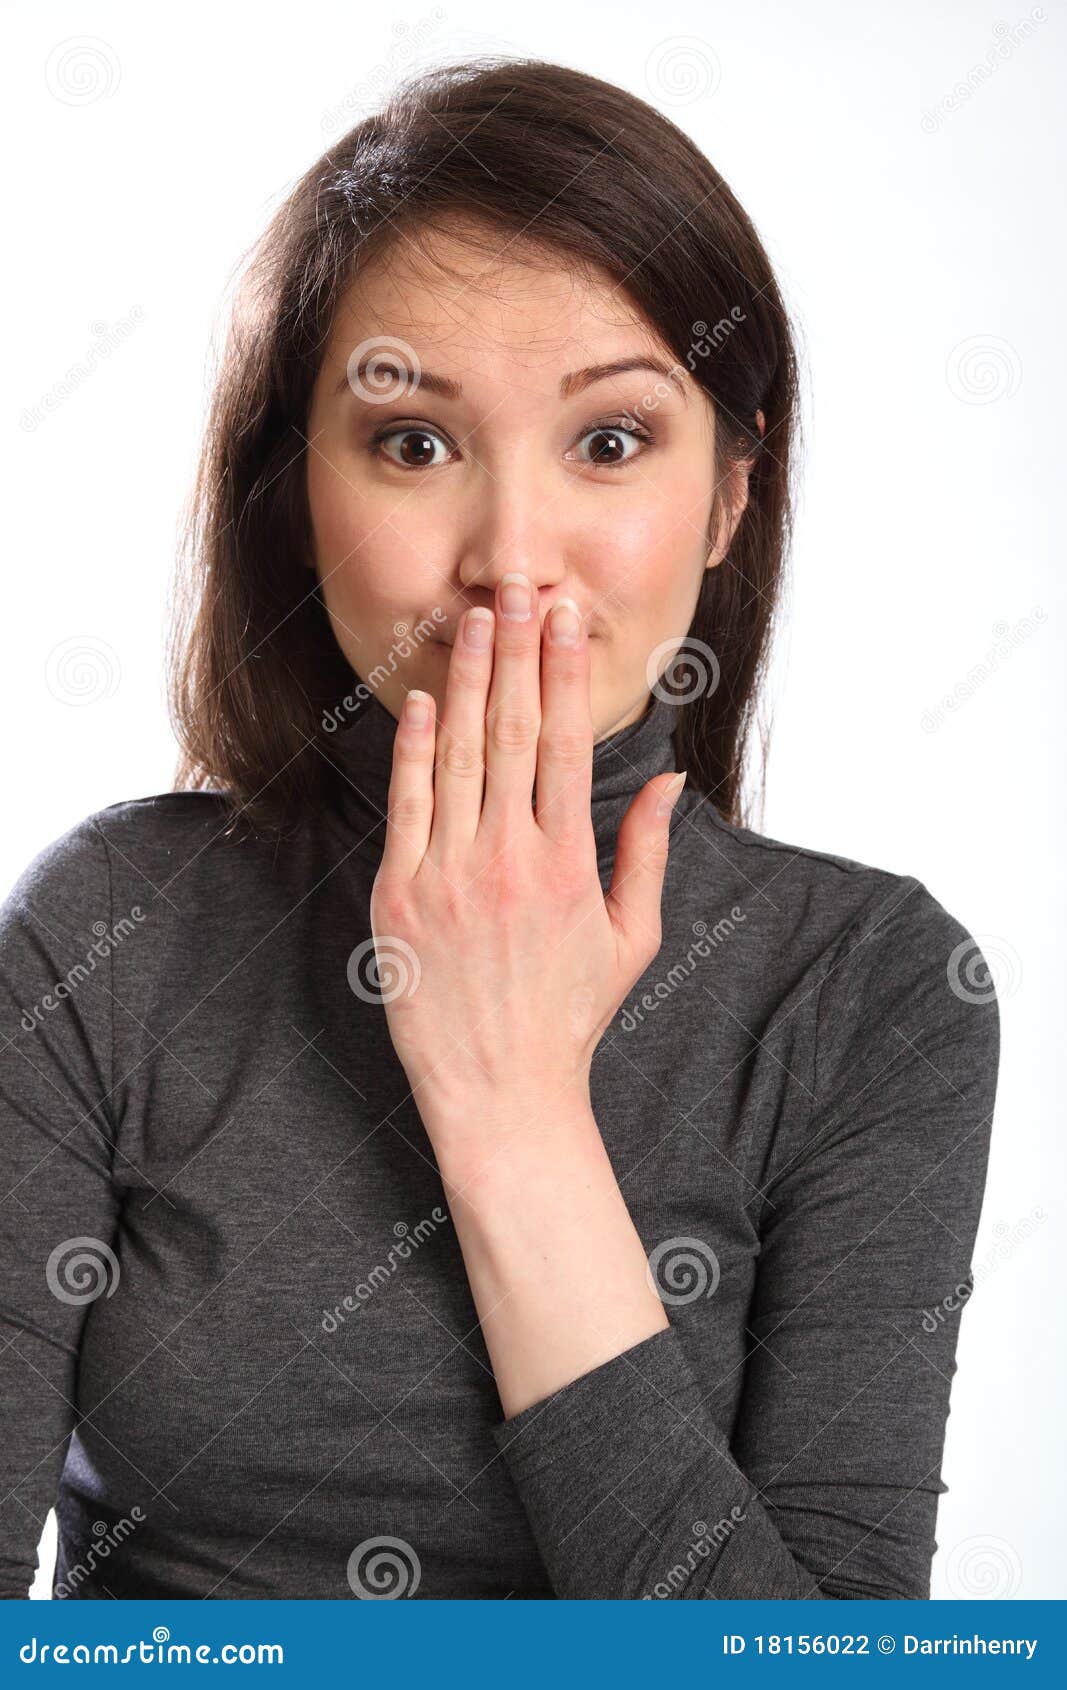 Hand Over Mouth Funny Moment Expression Stock Photography - Image: 18156022